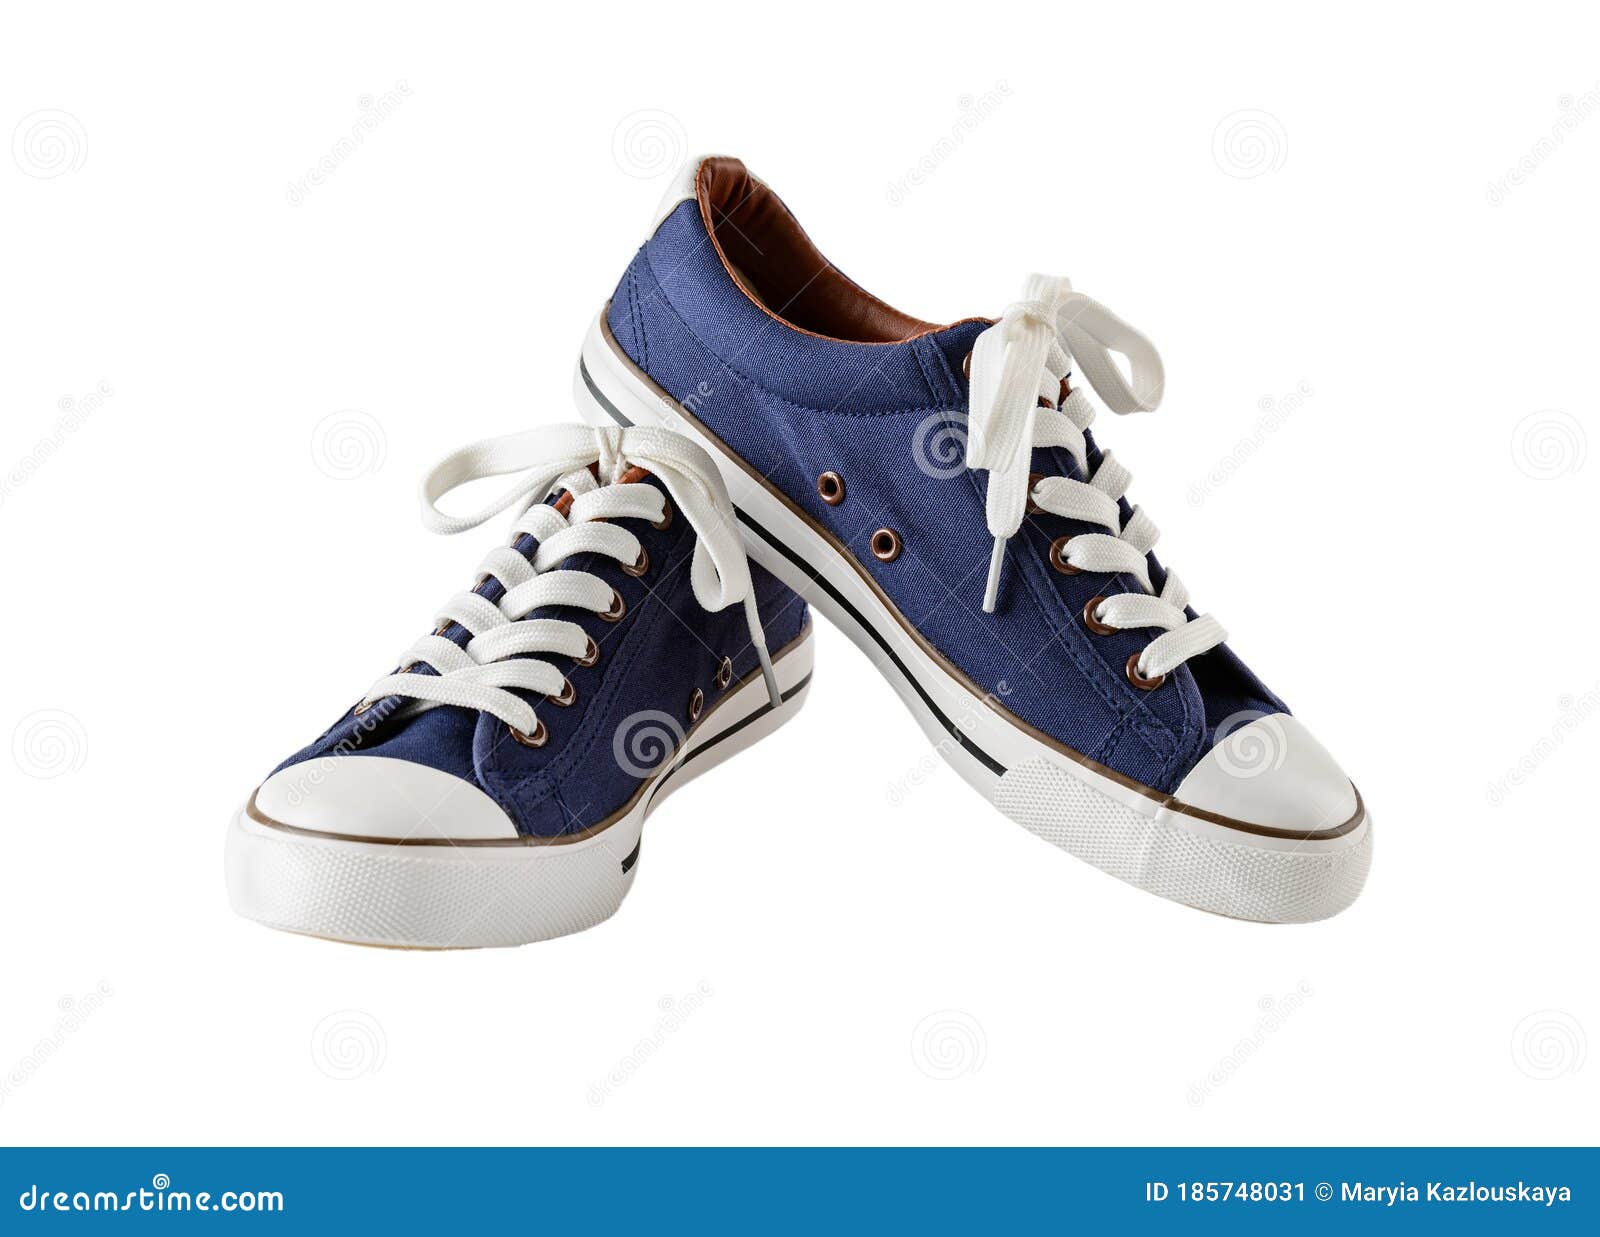 Pair of Classic Blue Sneakers or Gumshoes with White Shoe Laces ...